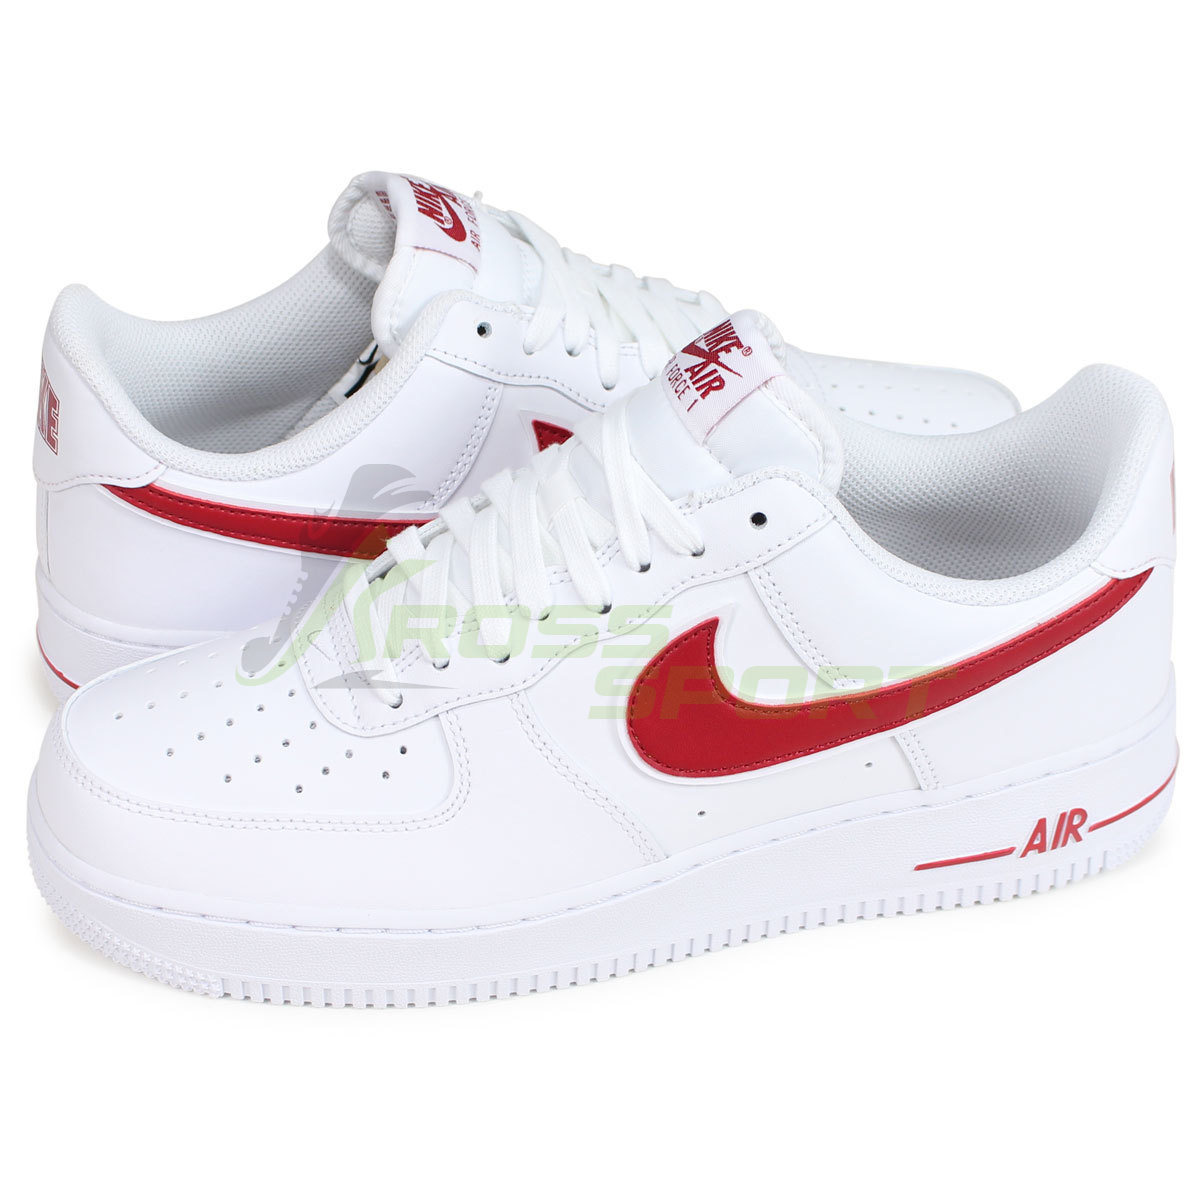  Nike Air Force 1 LV8 White/Red